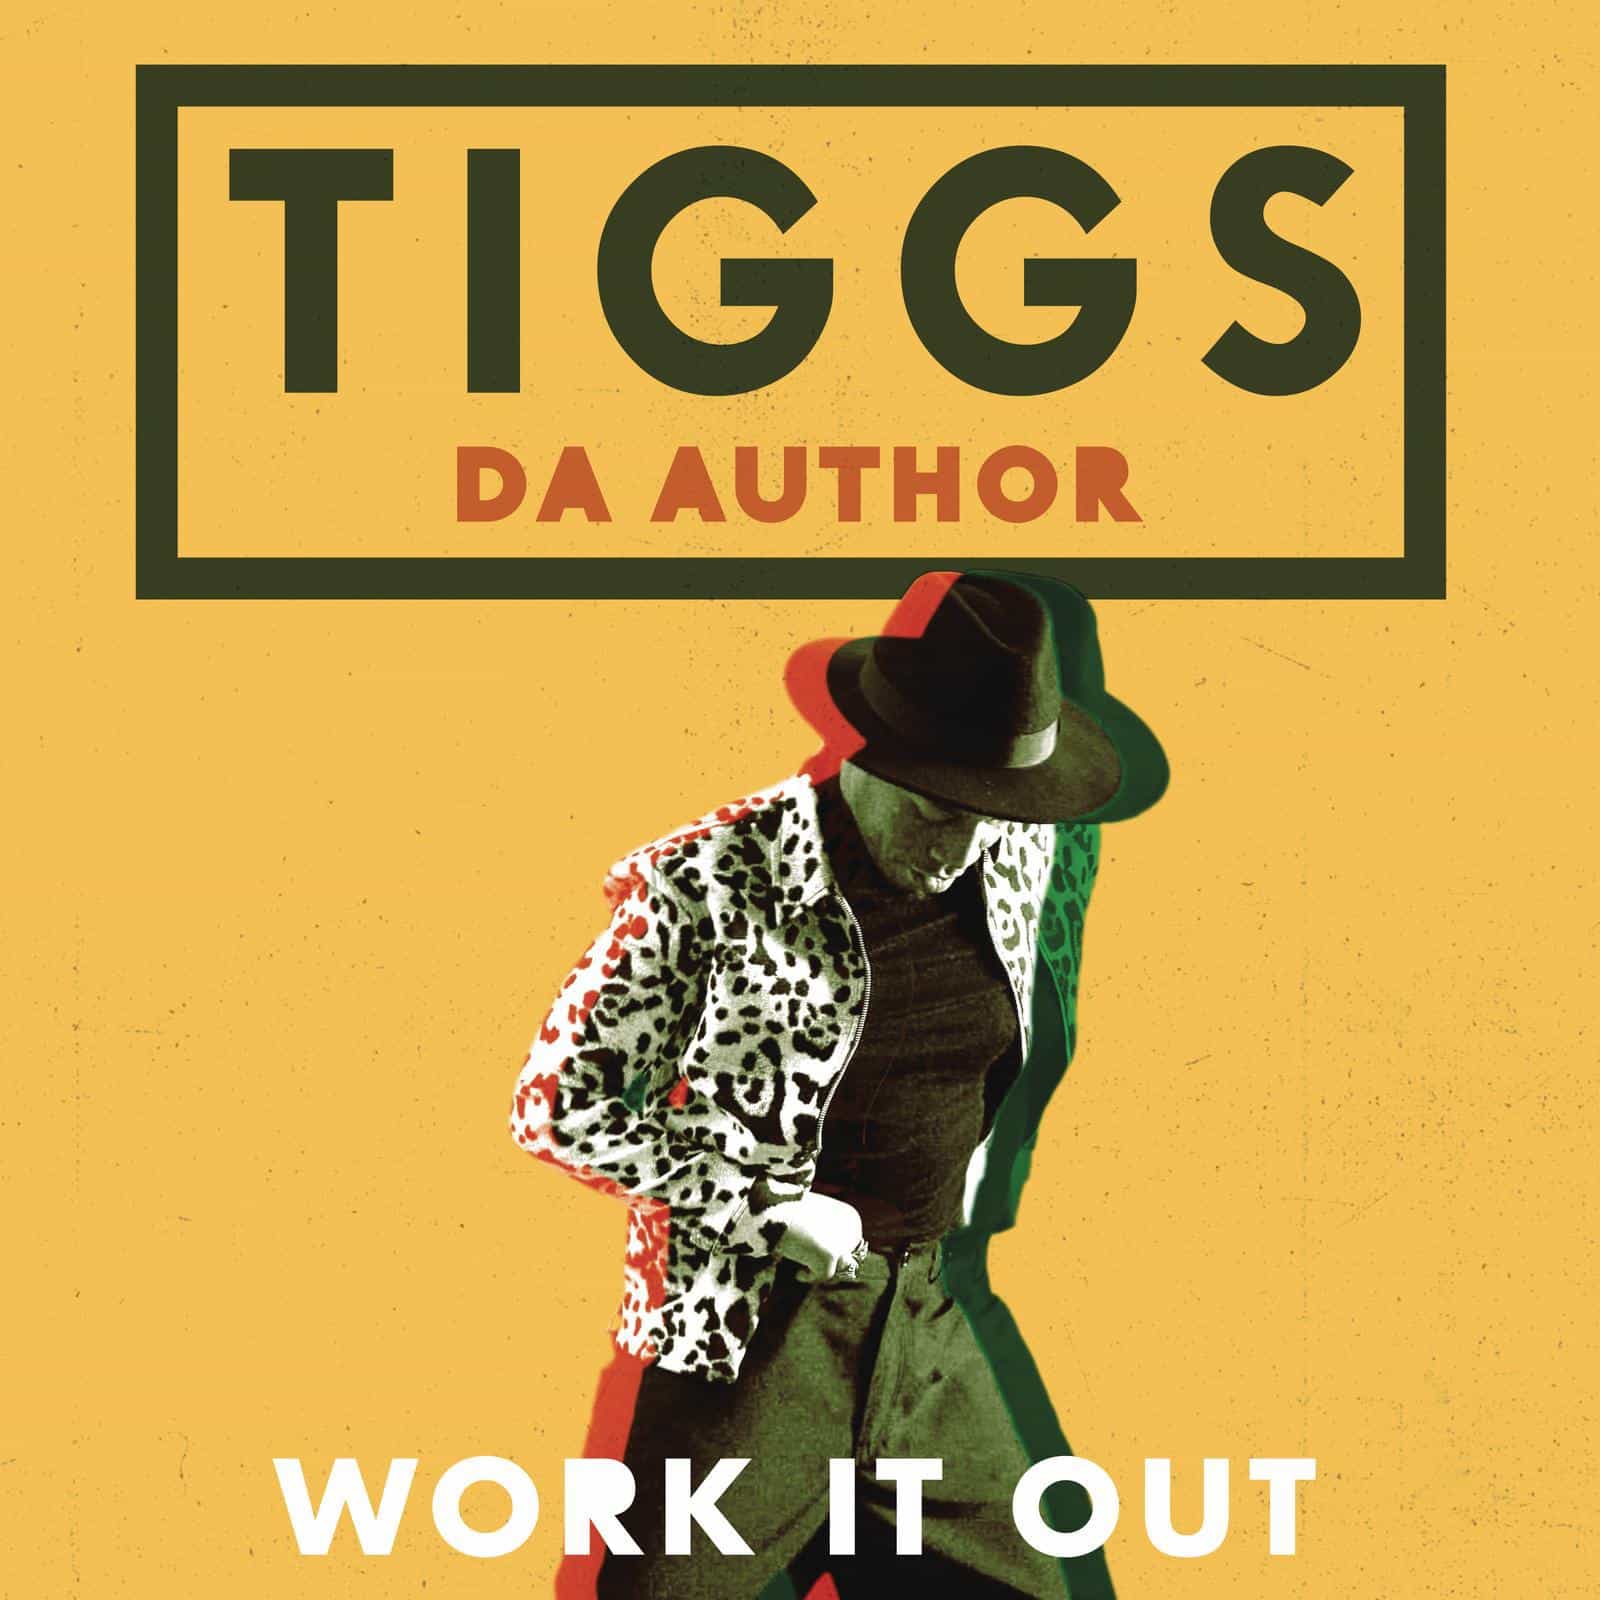 Doctor work it out. Work it out. Tiggs da author - morefire 2.